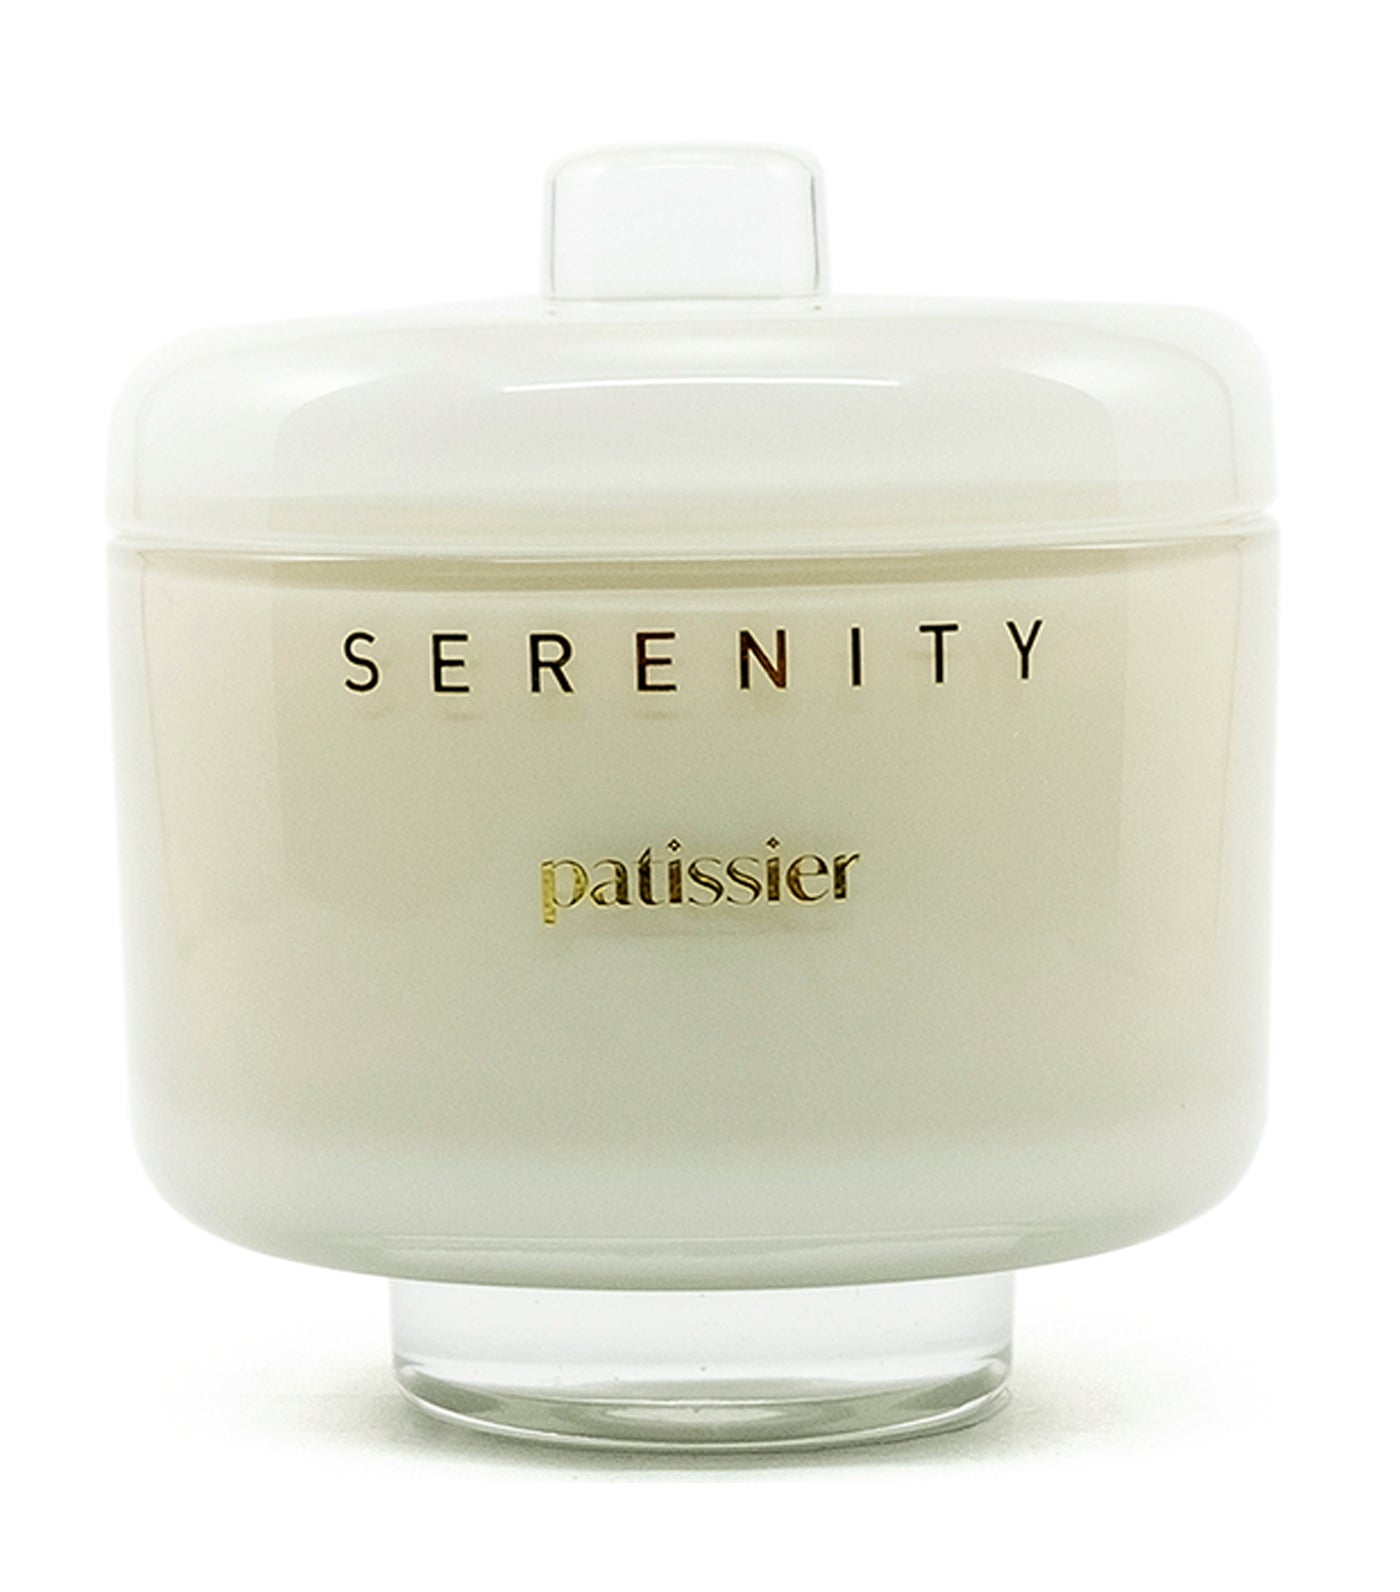 serenity vivid patissier scented candle